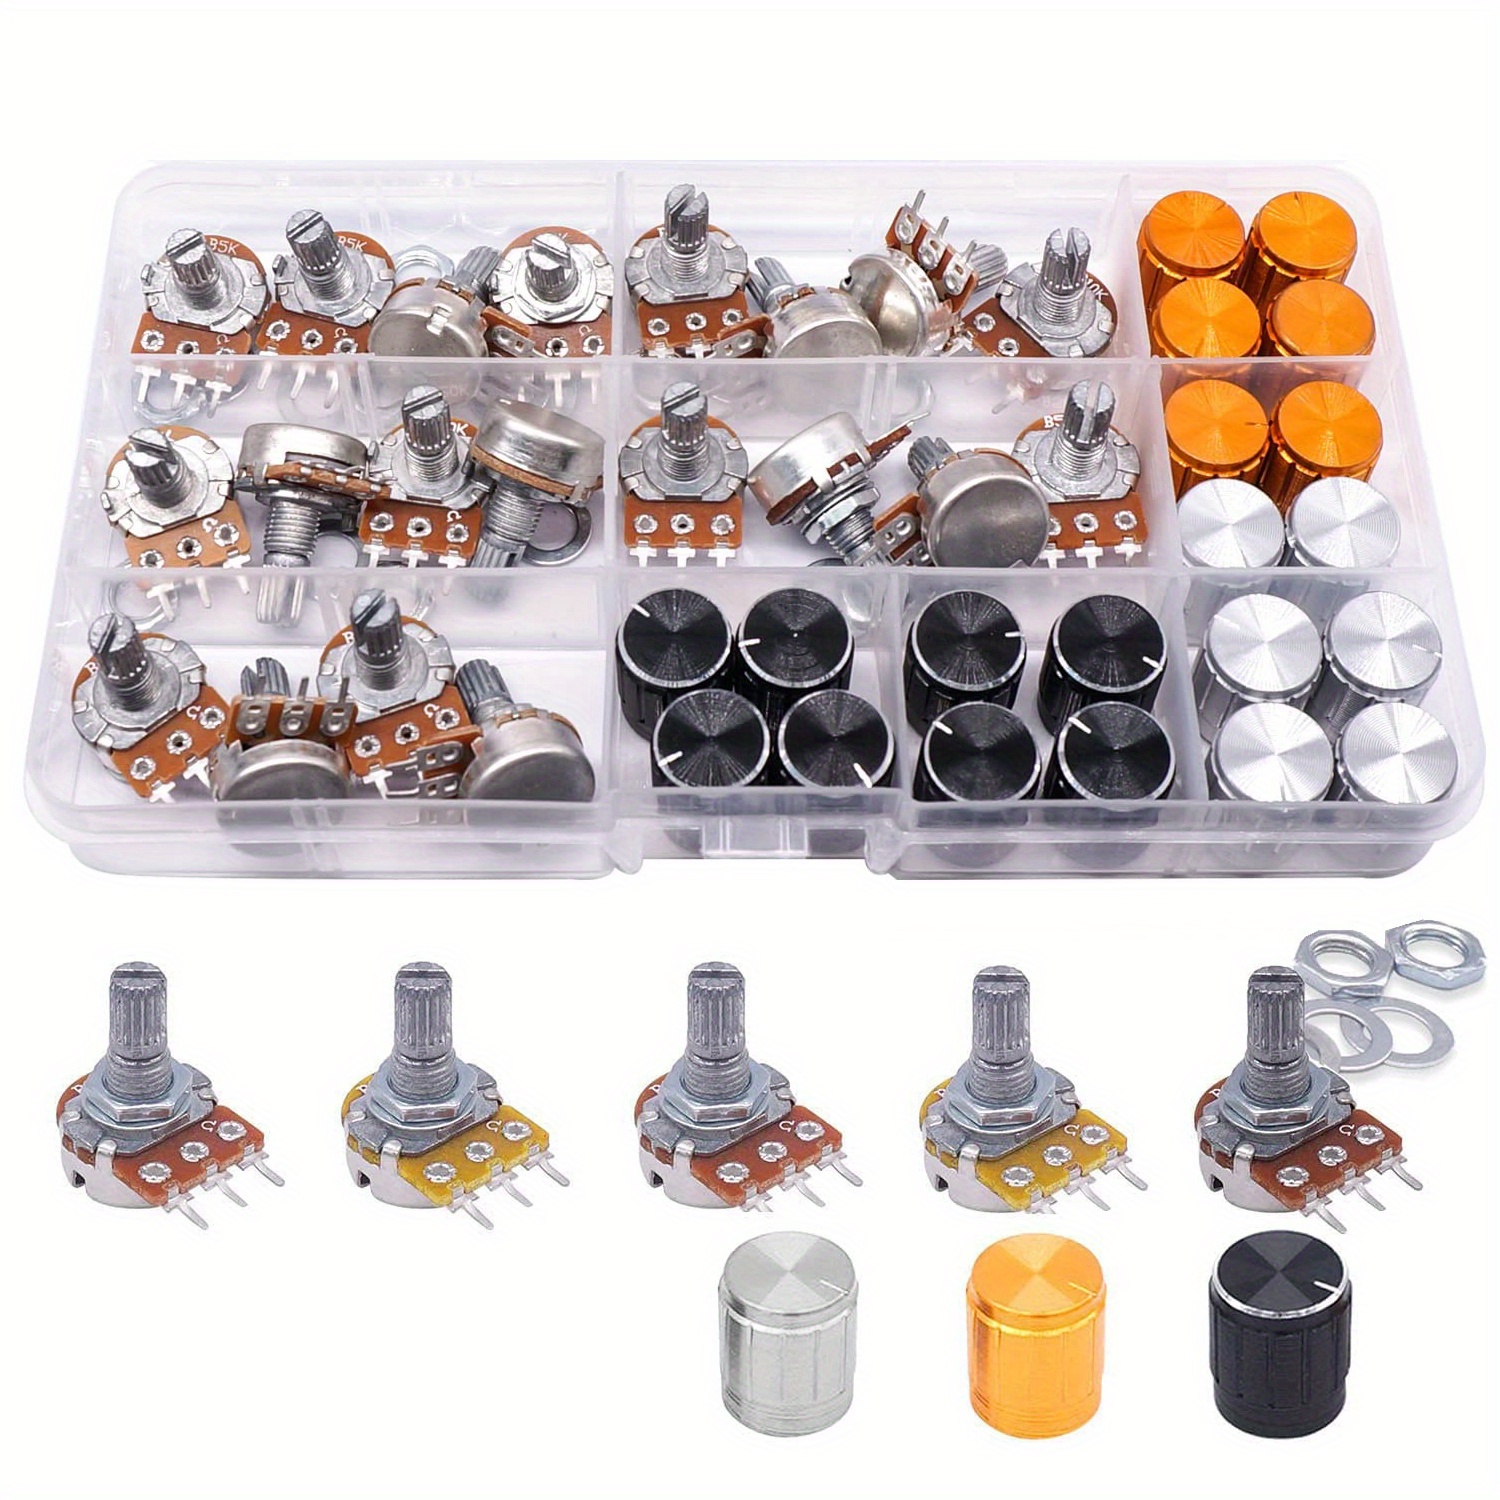 

60pcs Potentiometer Kit With Aluminum Alloy Knobs - B5k To B100k Ohm, Linear Taper For Audio & Electronics, Includes Nuts, Washers - Assorted Colors